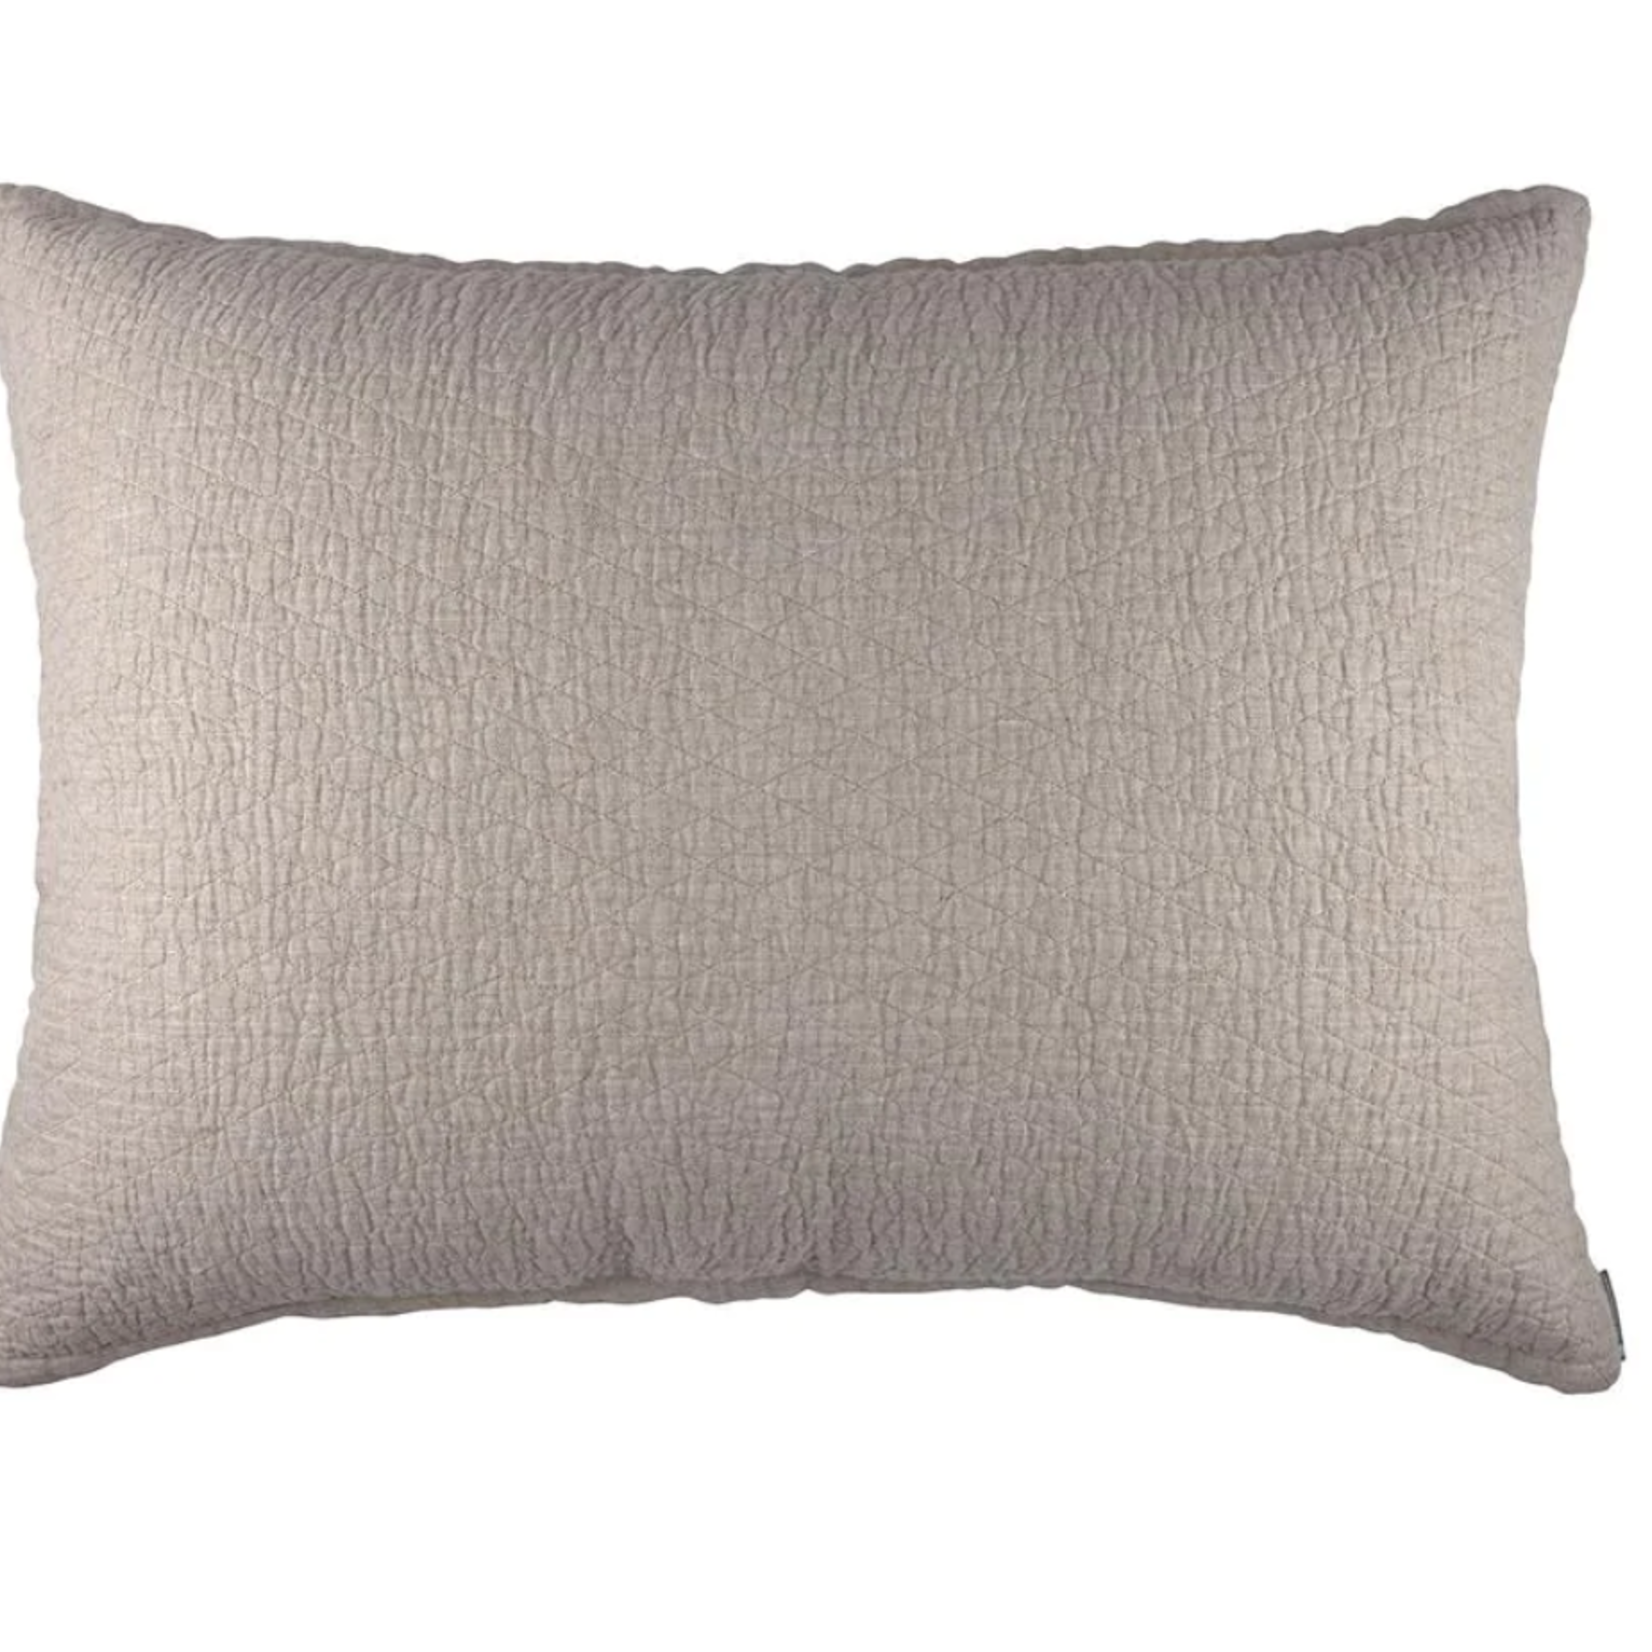 DAWN DIAMOND QUILTED PILLOW